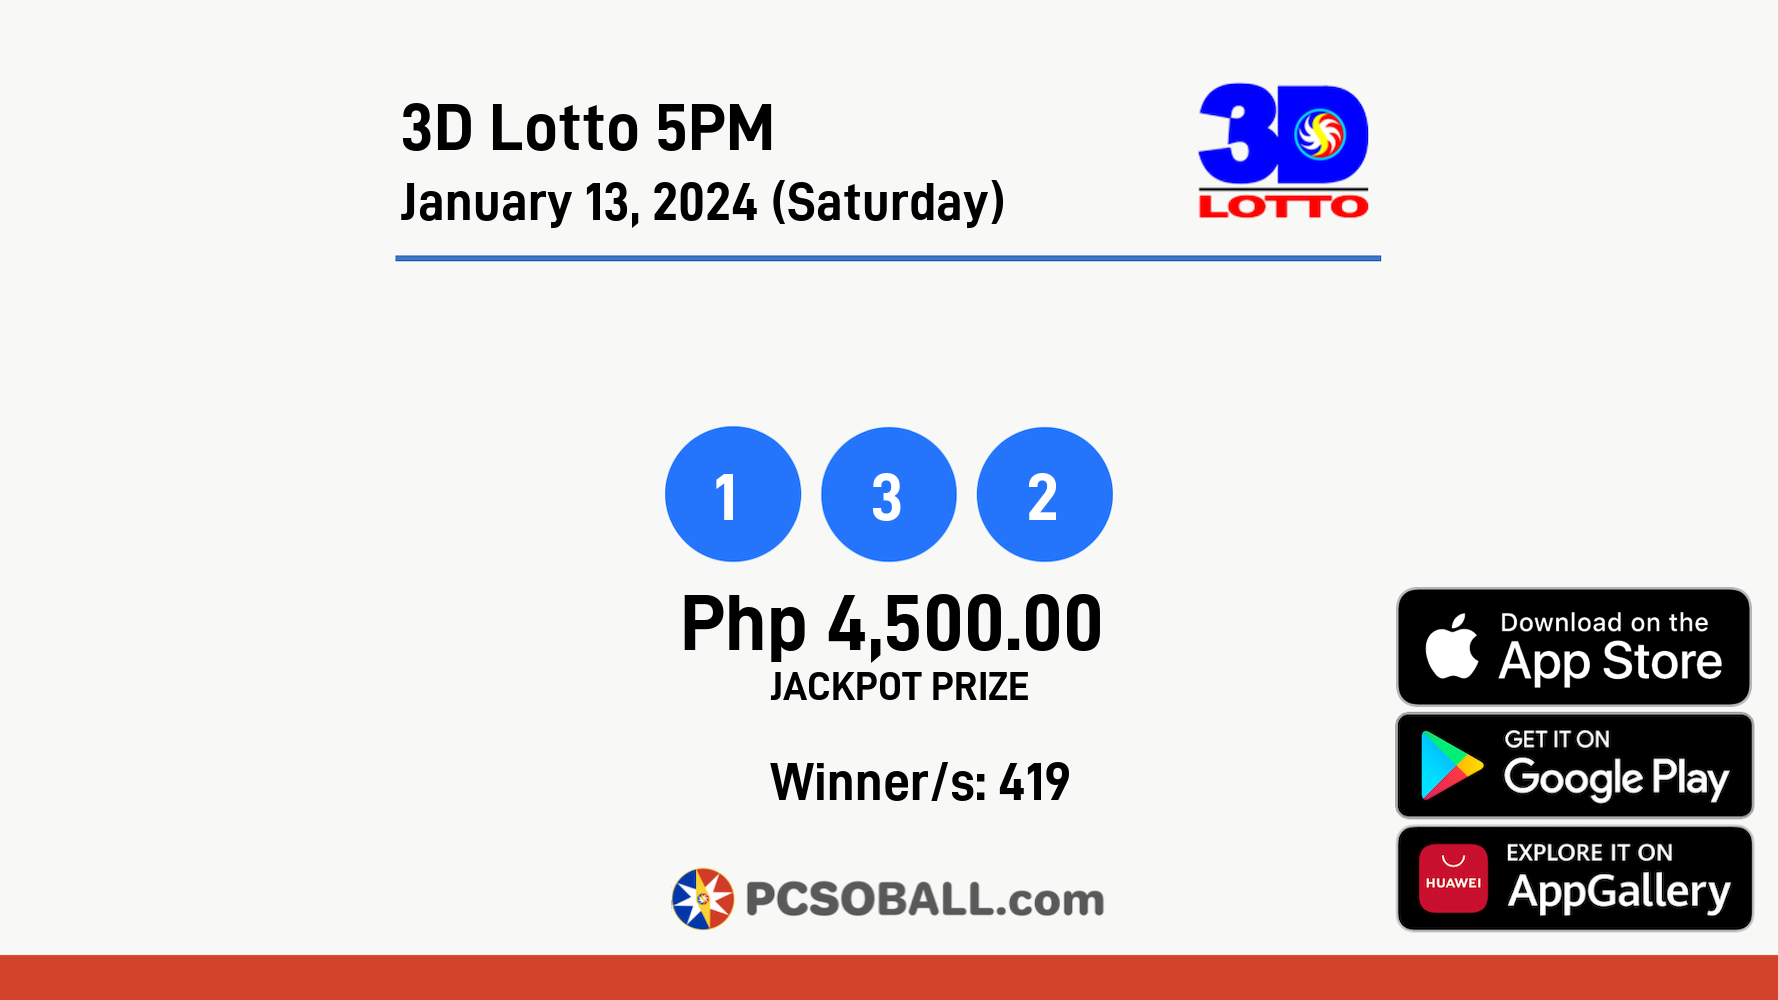 3D Lotto 5PM January 13, 2024 (Saturday) Result